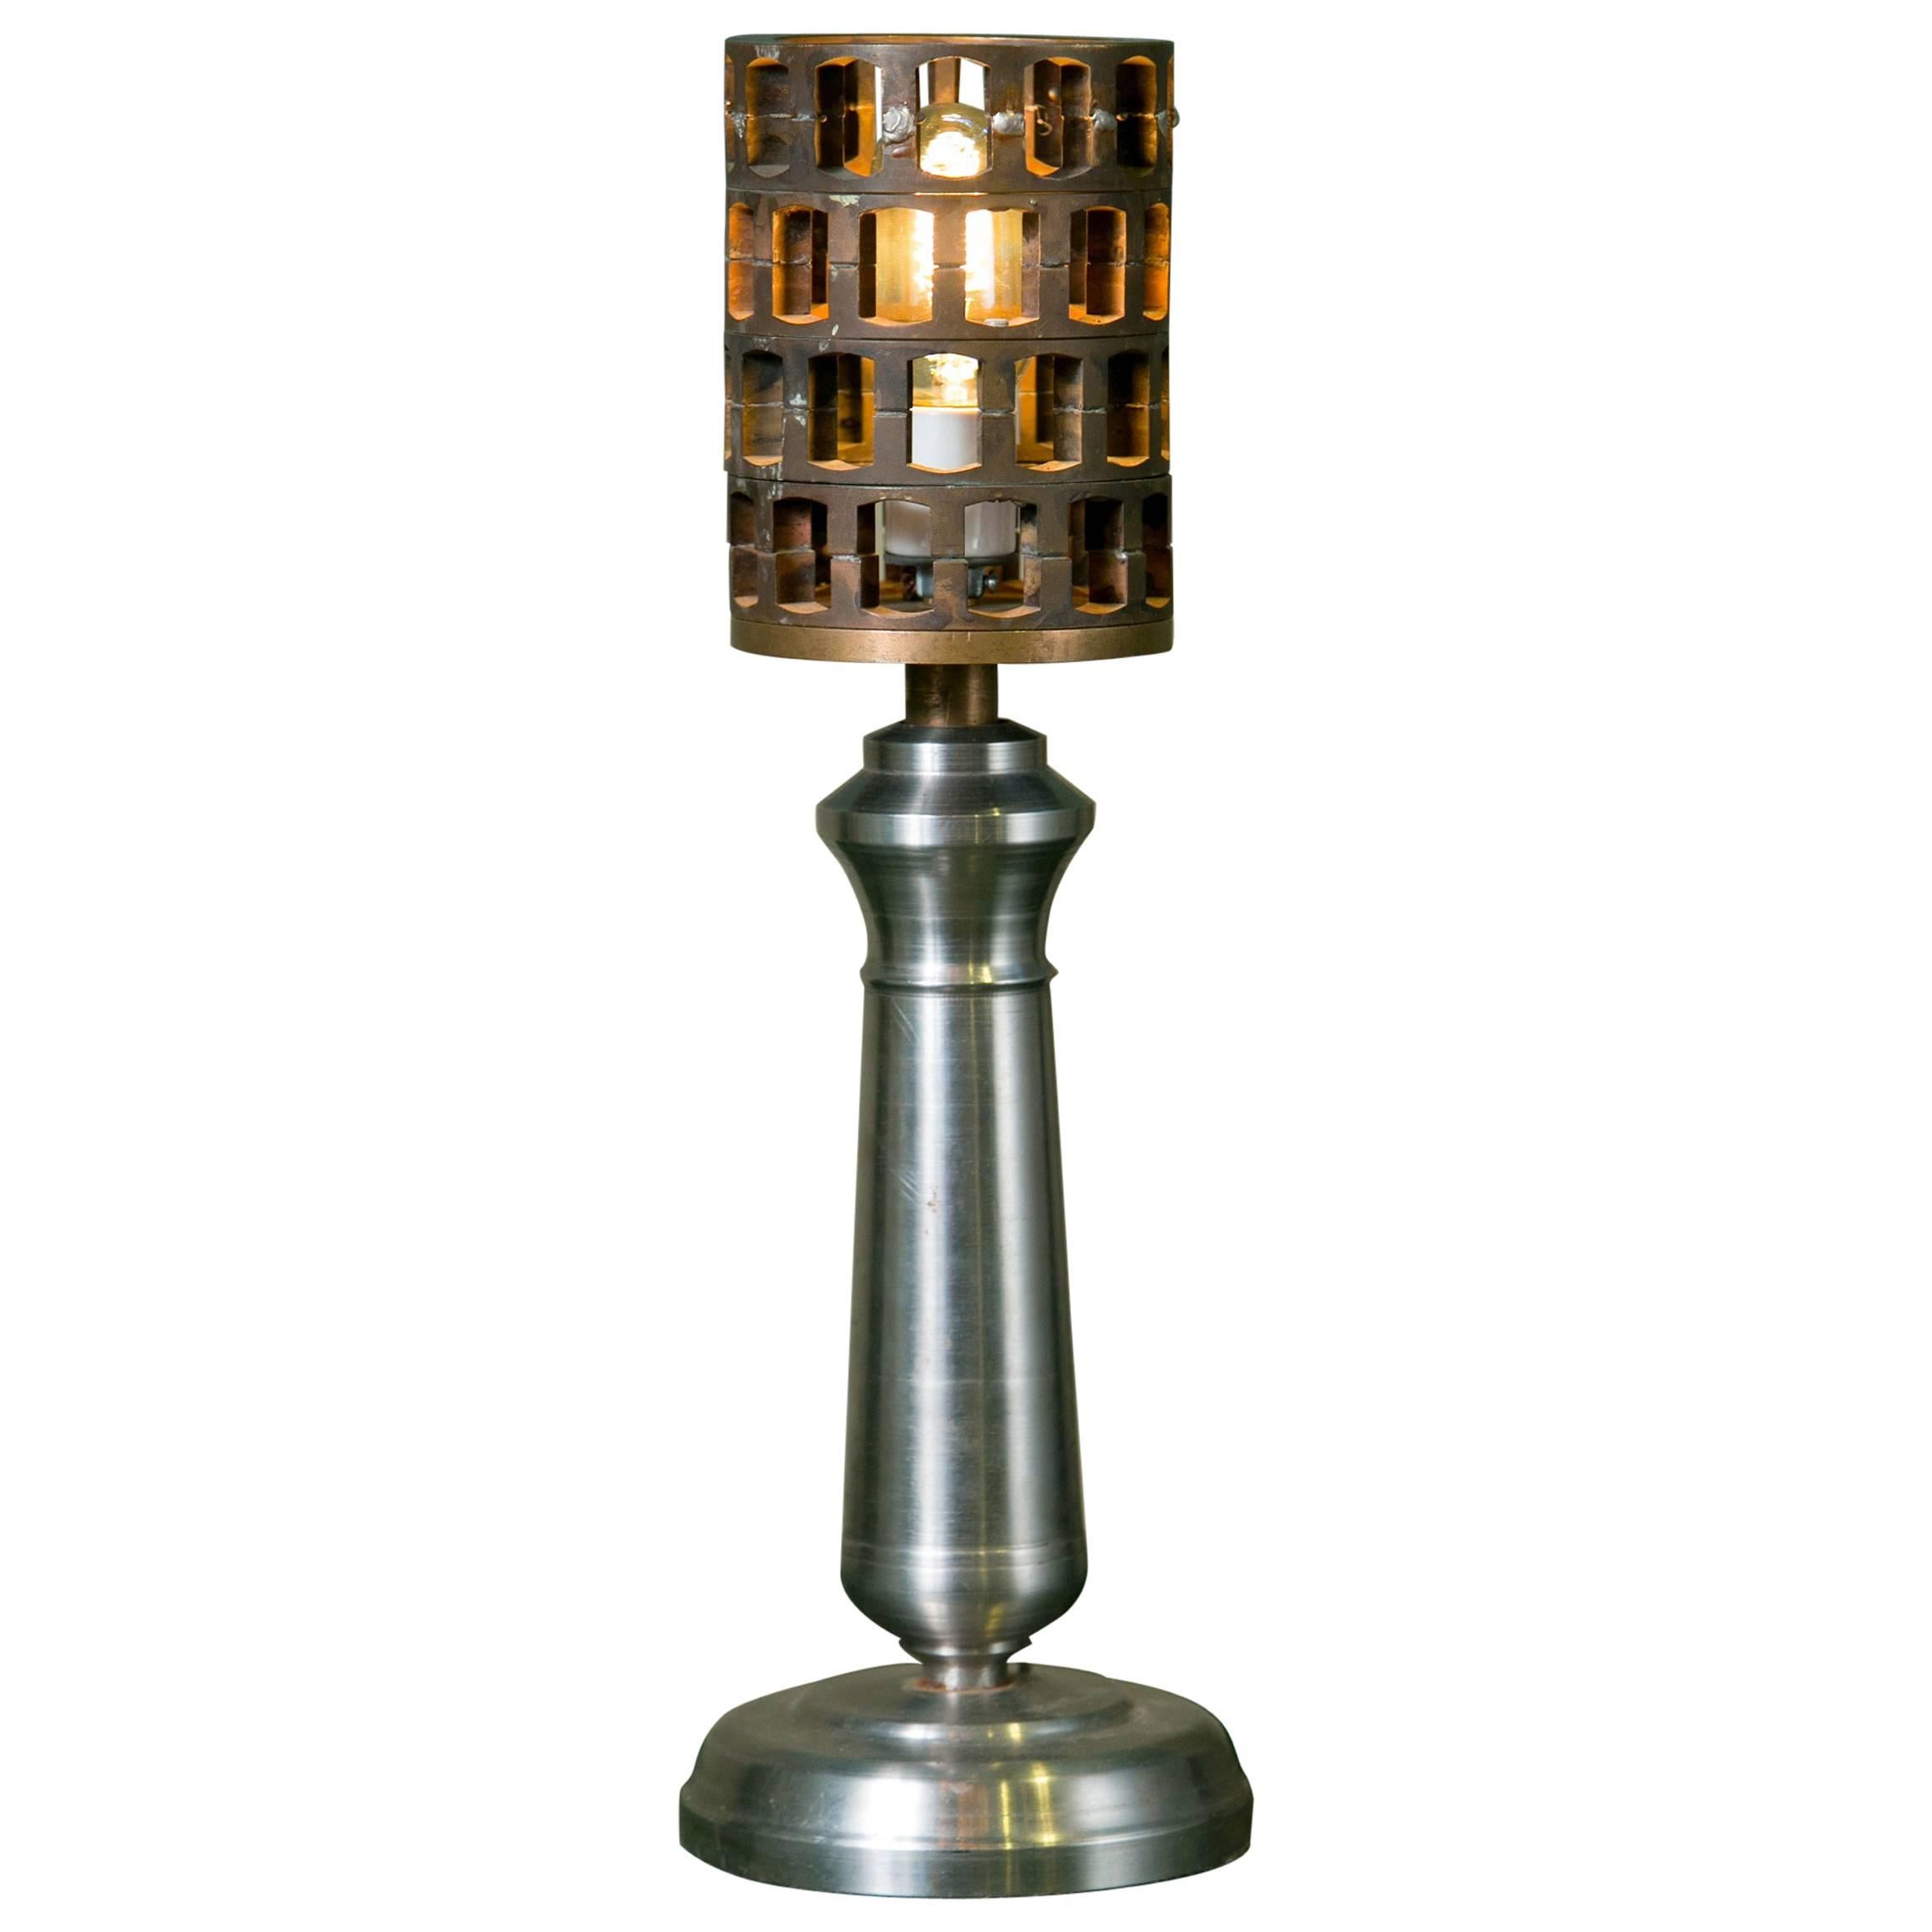 One of a Kind Industrial Steel and Brass Table Lamp from France, Circa 1940